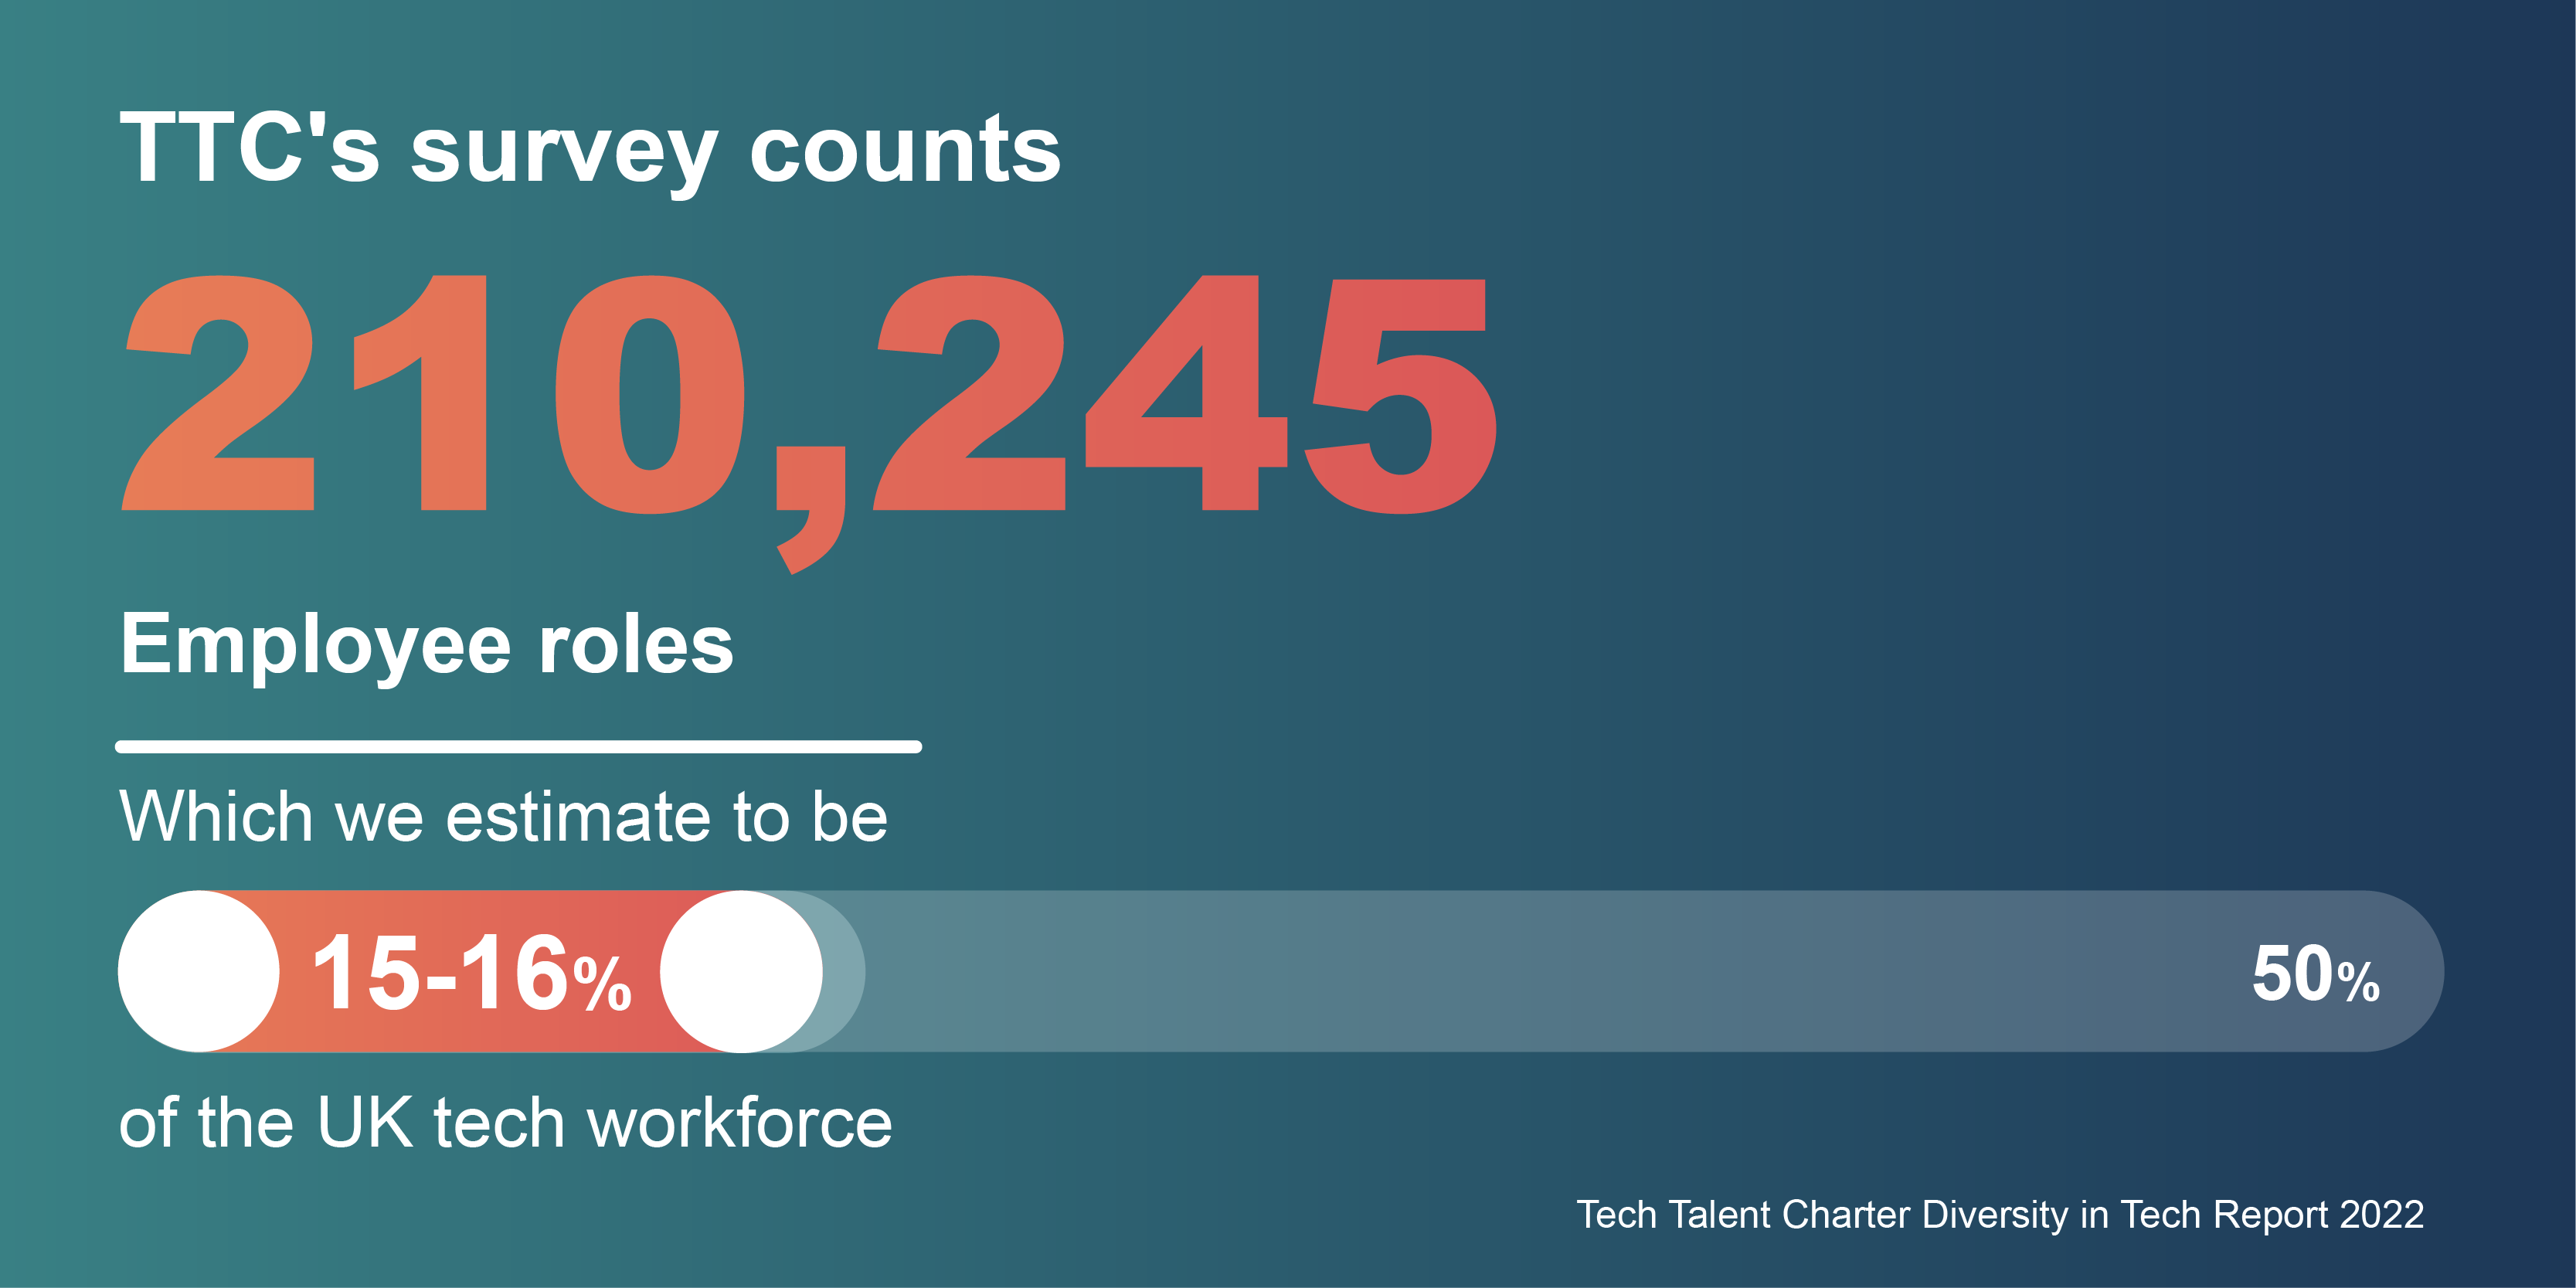 TTC's survey counts 210,245 employee roles. It is estimated to be 15 to 16% of the UK tech workforce.